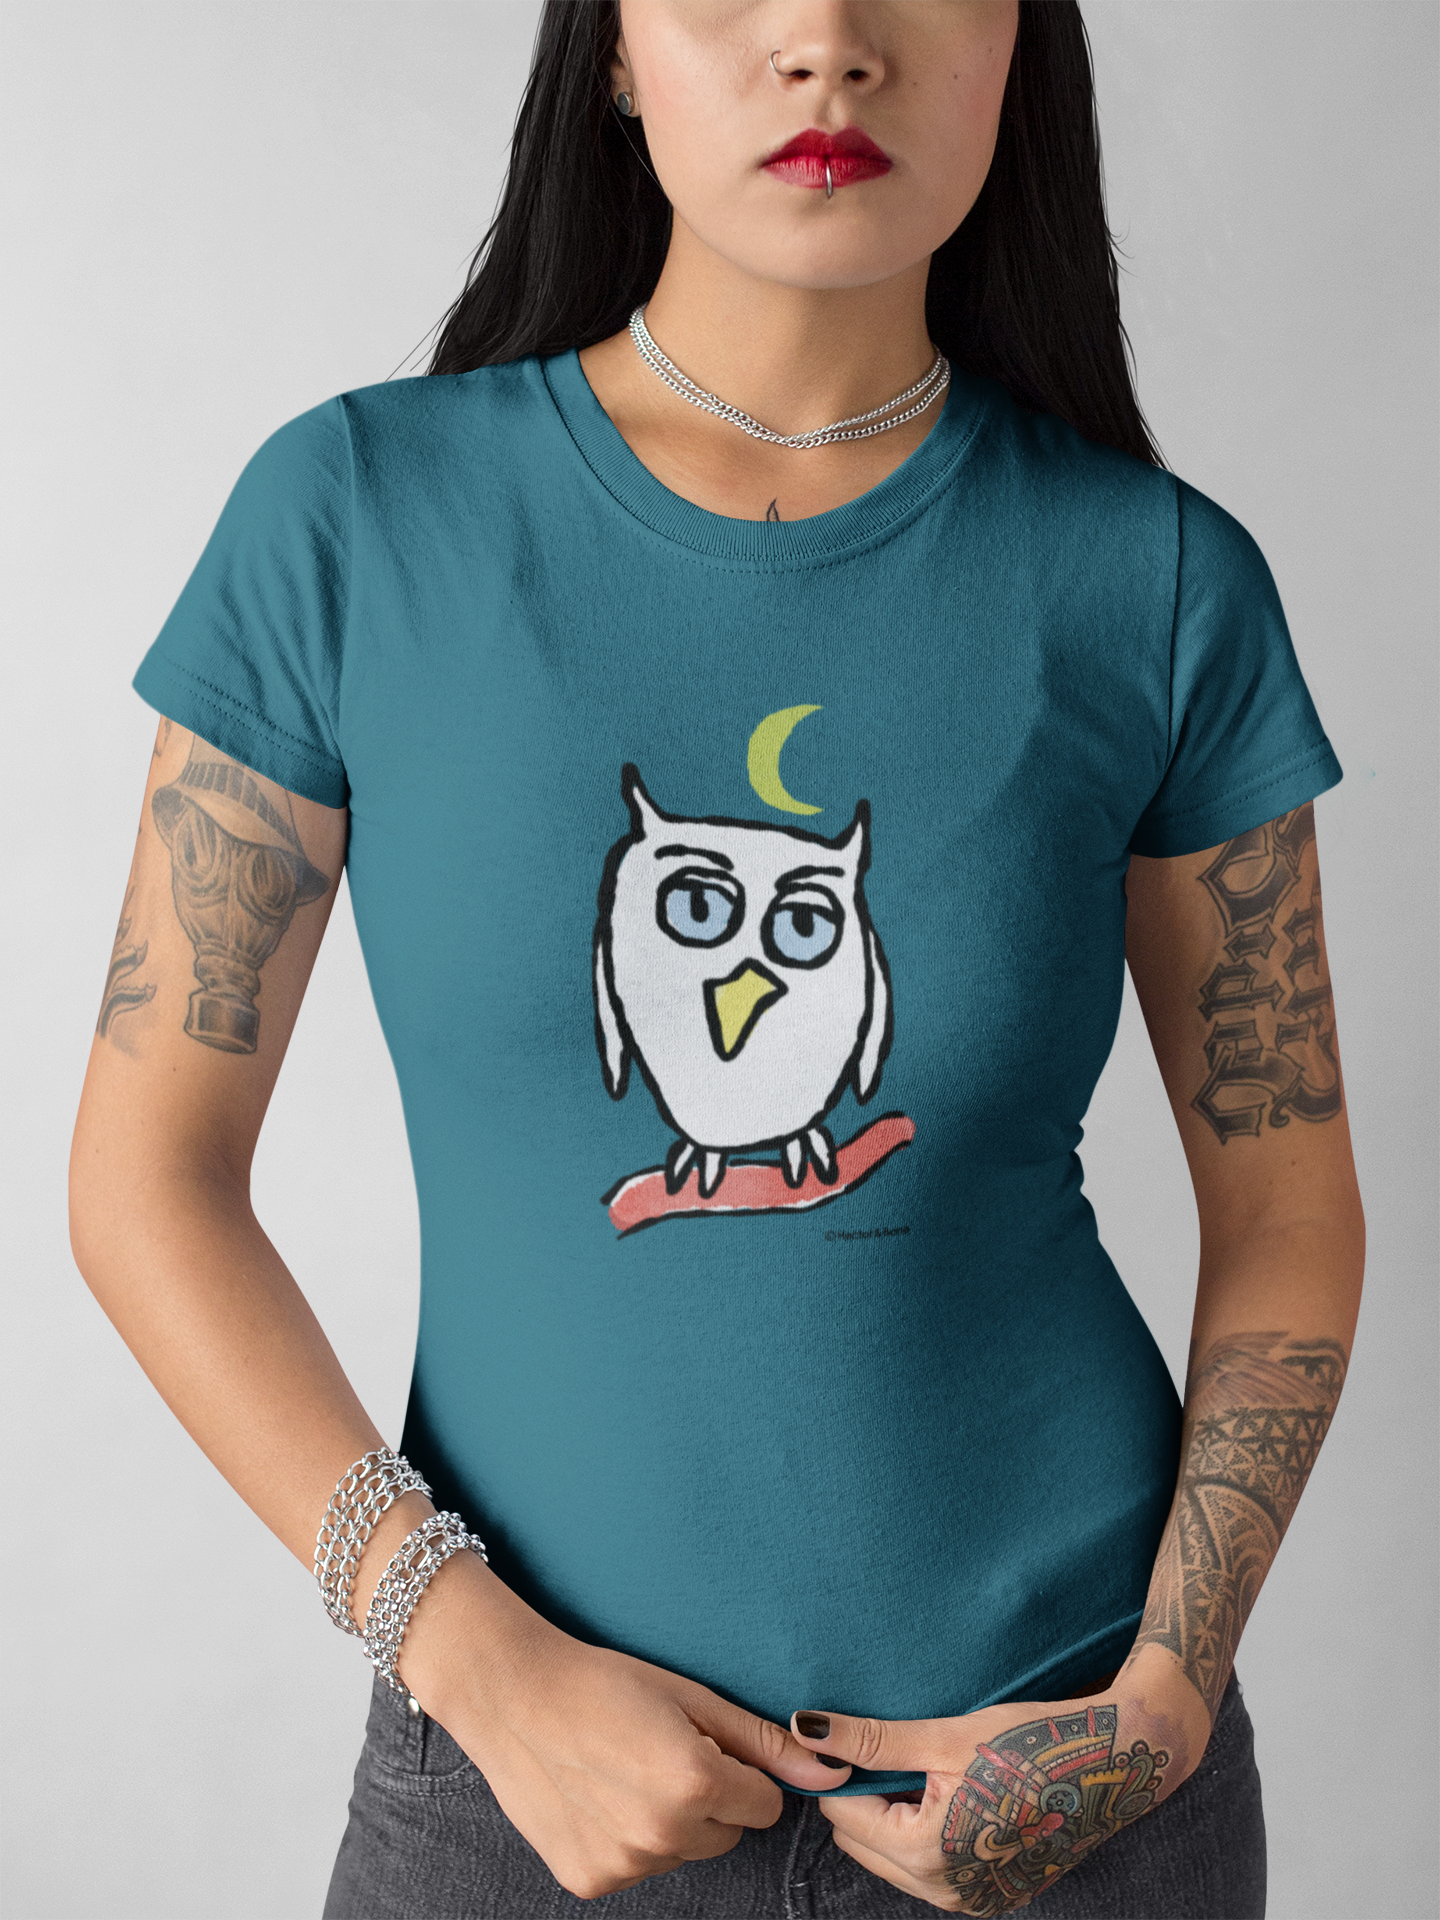 Owl T-shirts - Young woman wearing a night blue colour vegan cotton Night Owl T-shirt design by Hector and Bone